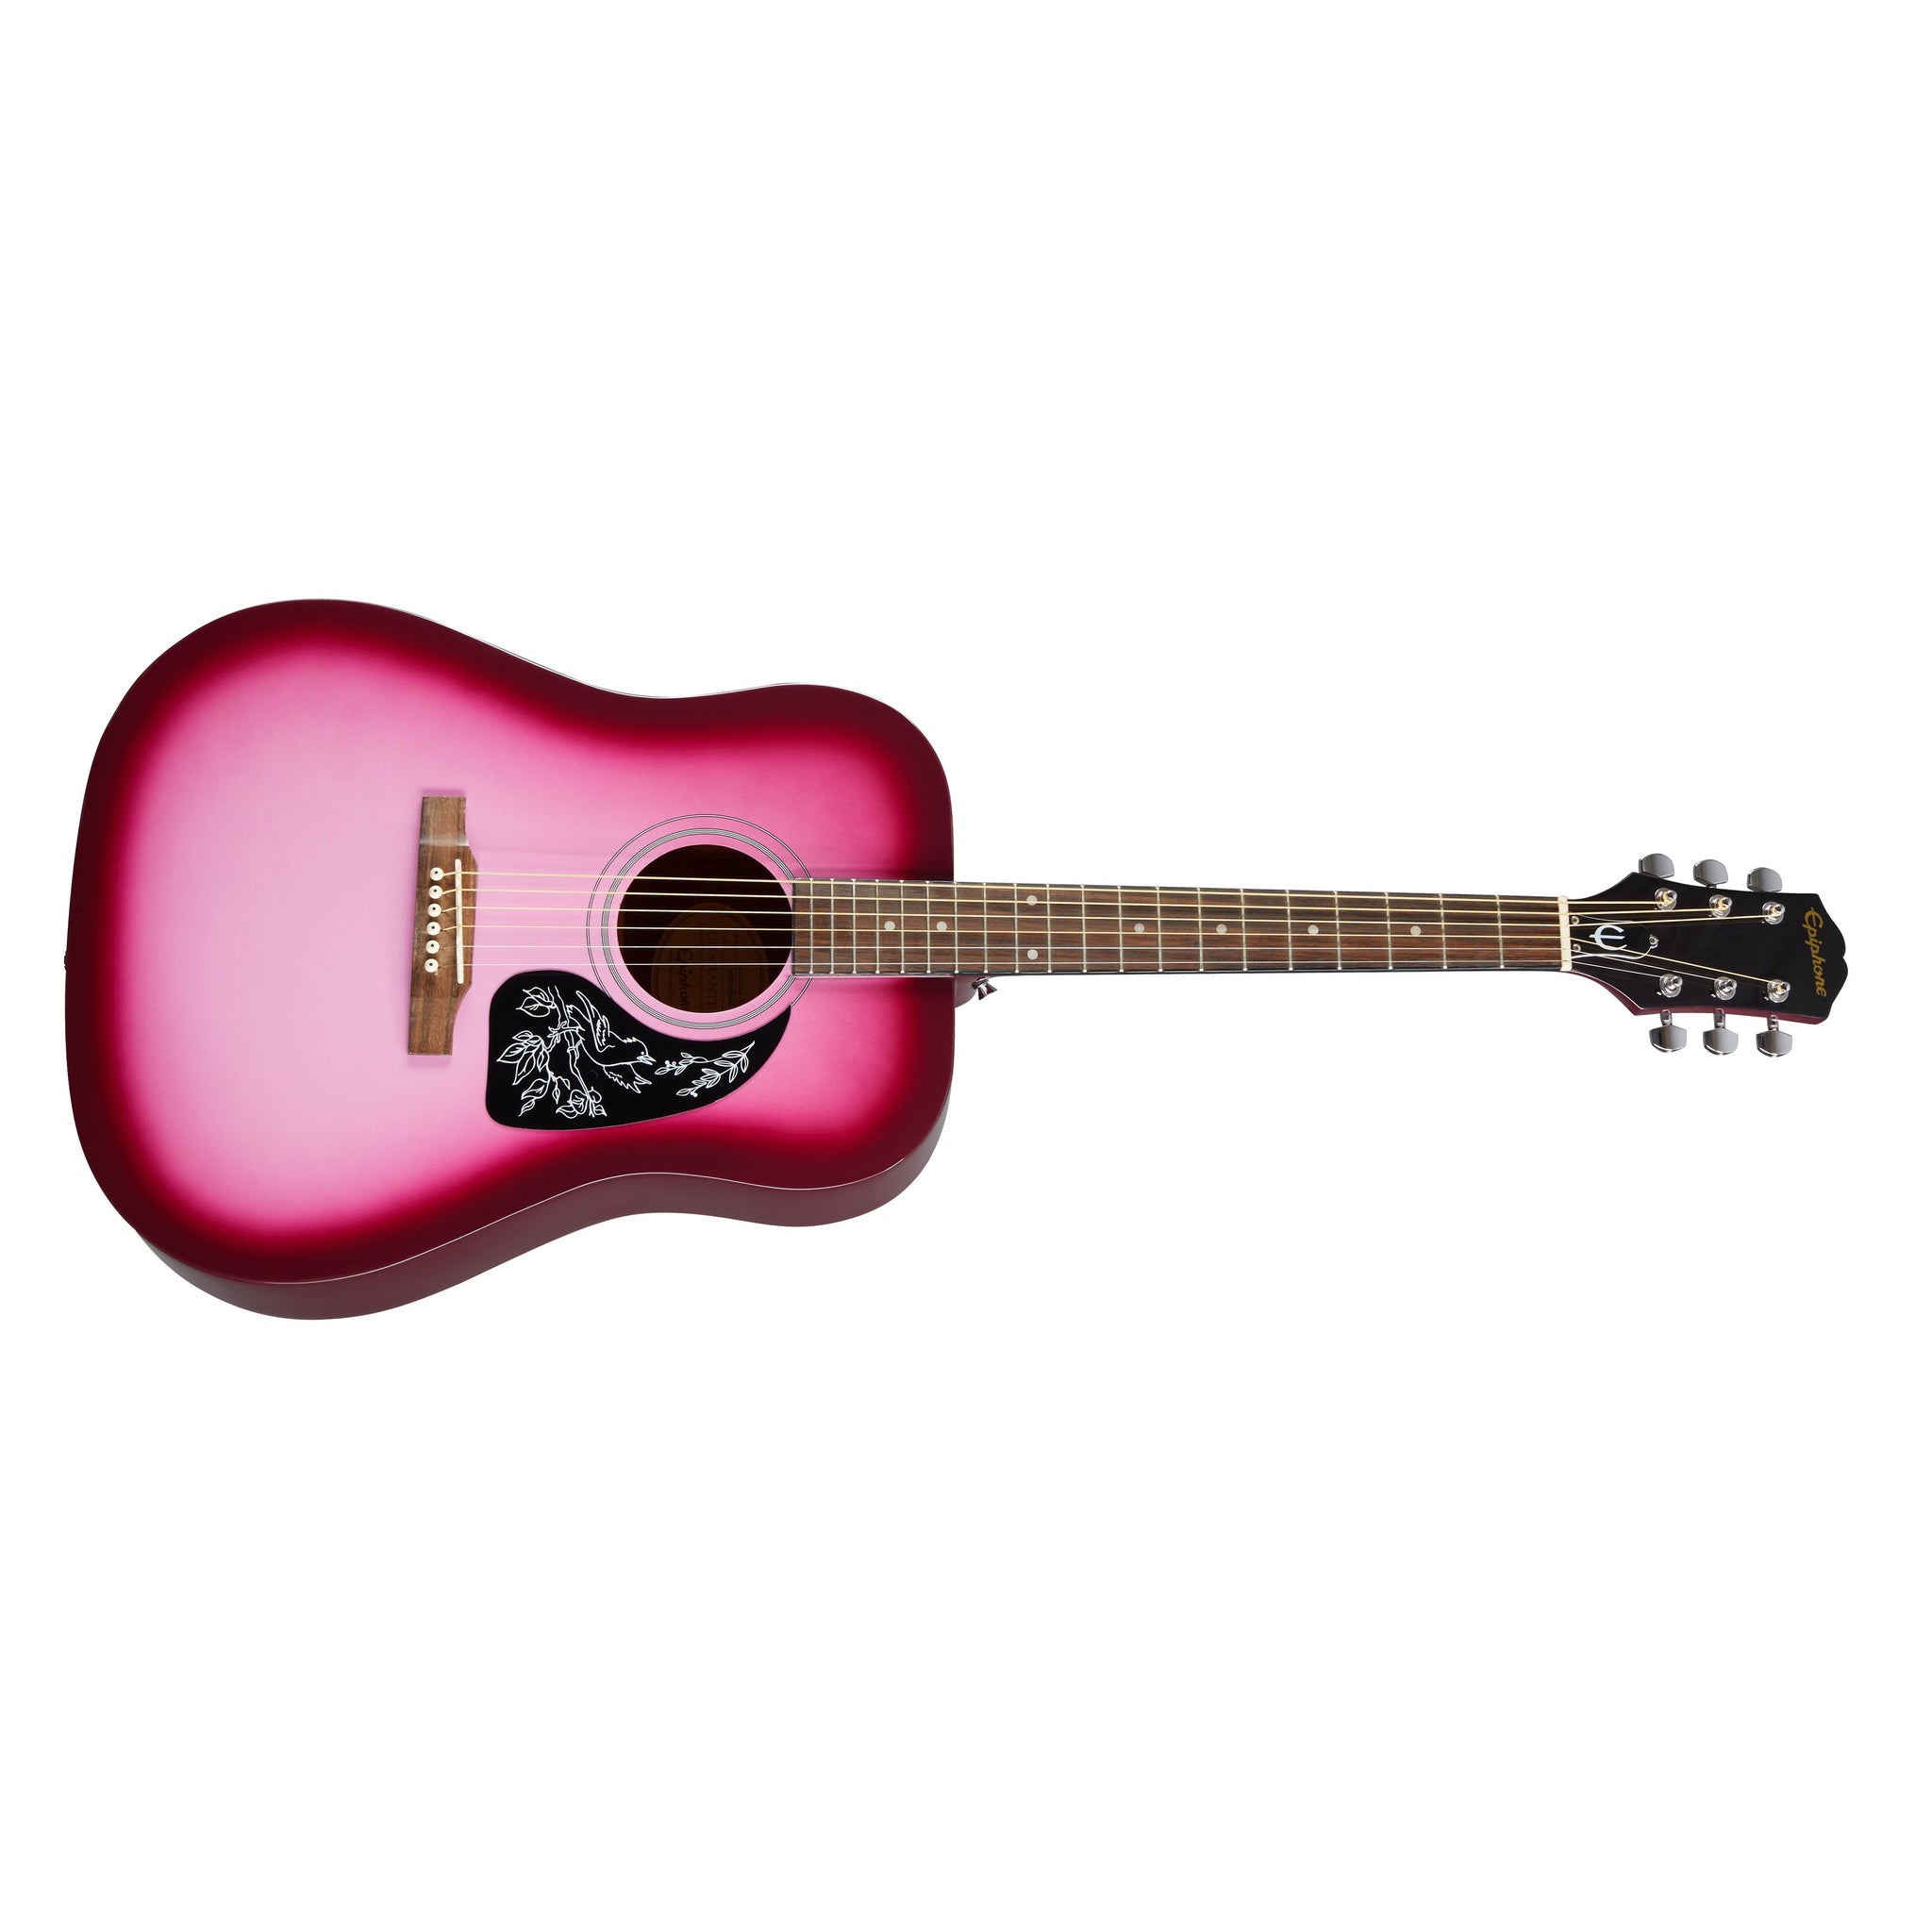 Epiphone Starling Acoustic Guitar-Hot Pink Pearl-Music World Academy